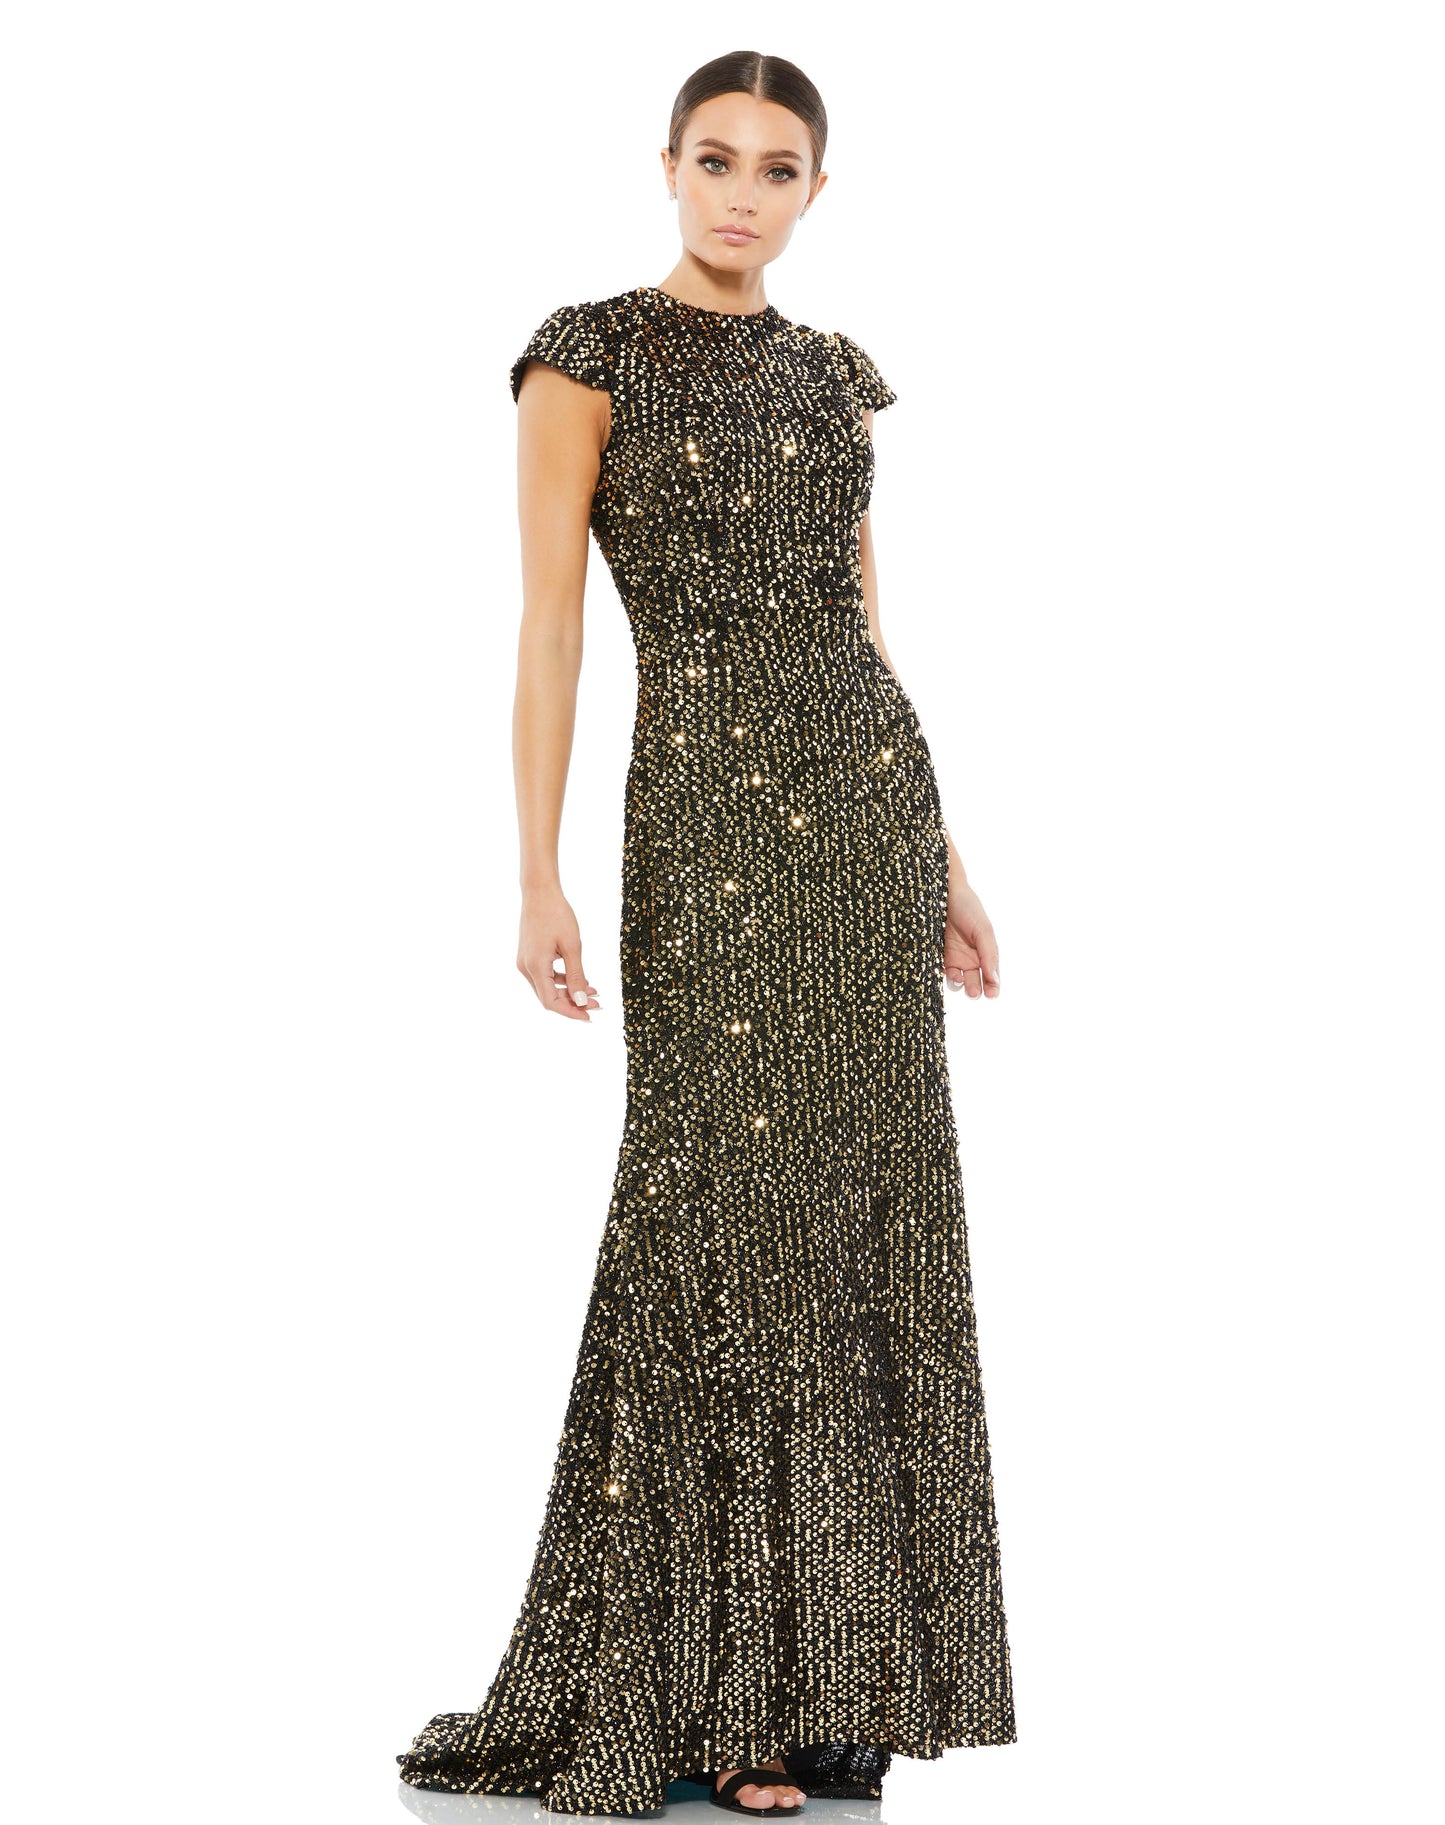 Nothing to wear? When you want to dress to impress, turn to this mini-paillette-embellished gown. The gorgeous gown is textured with scintillating sequins from head to toe and styled with a jewel neckline, cap sleeves, and a sweep train finish. Ieena for